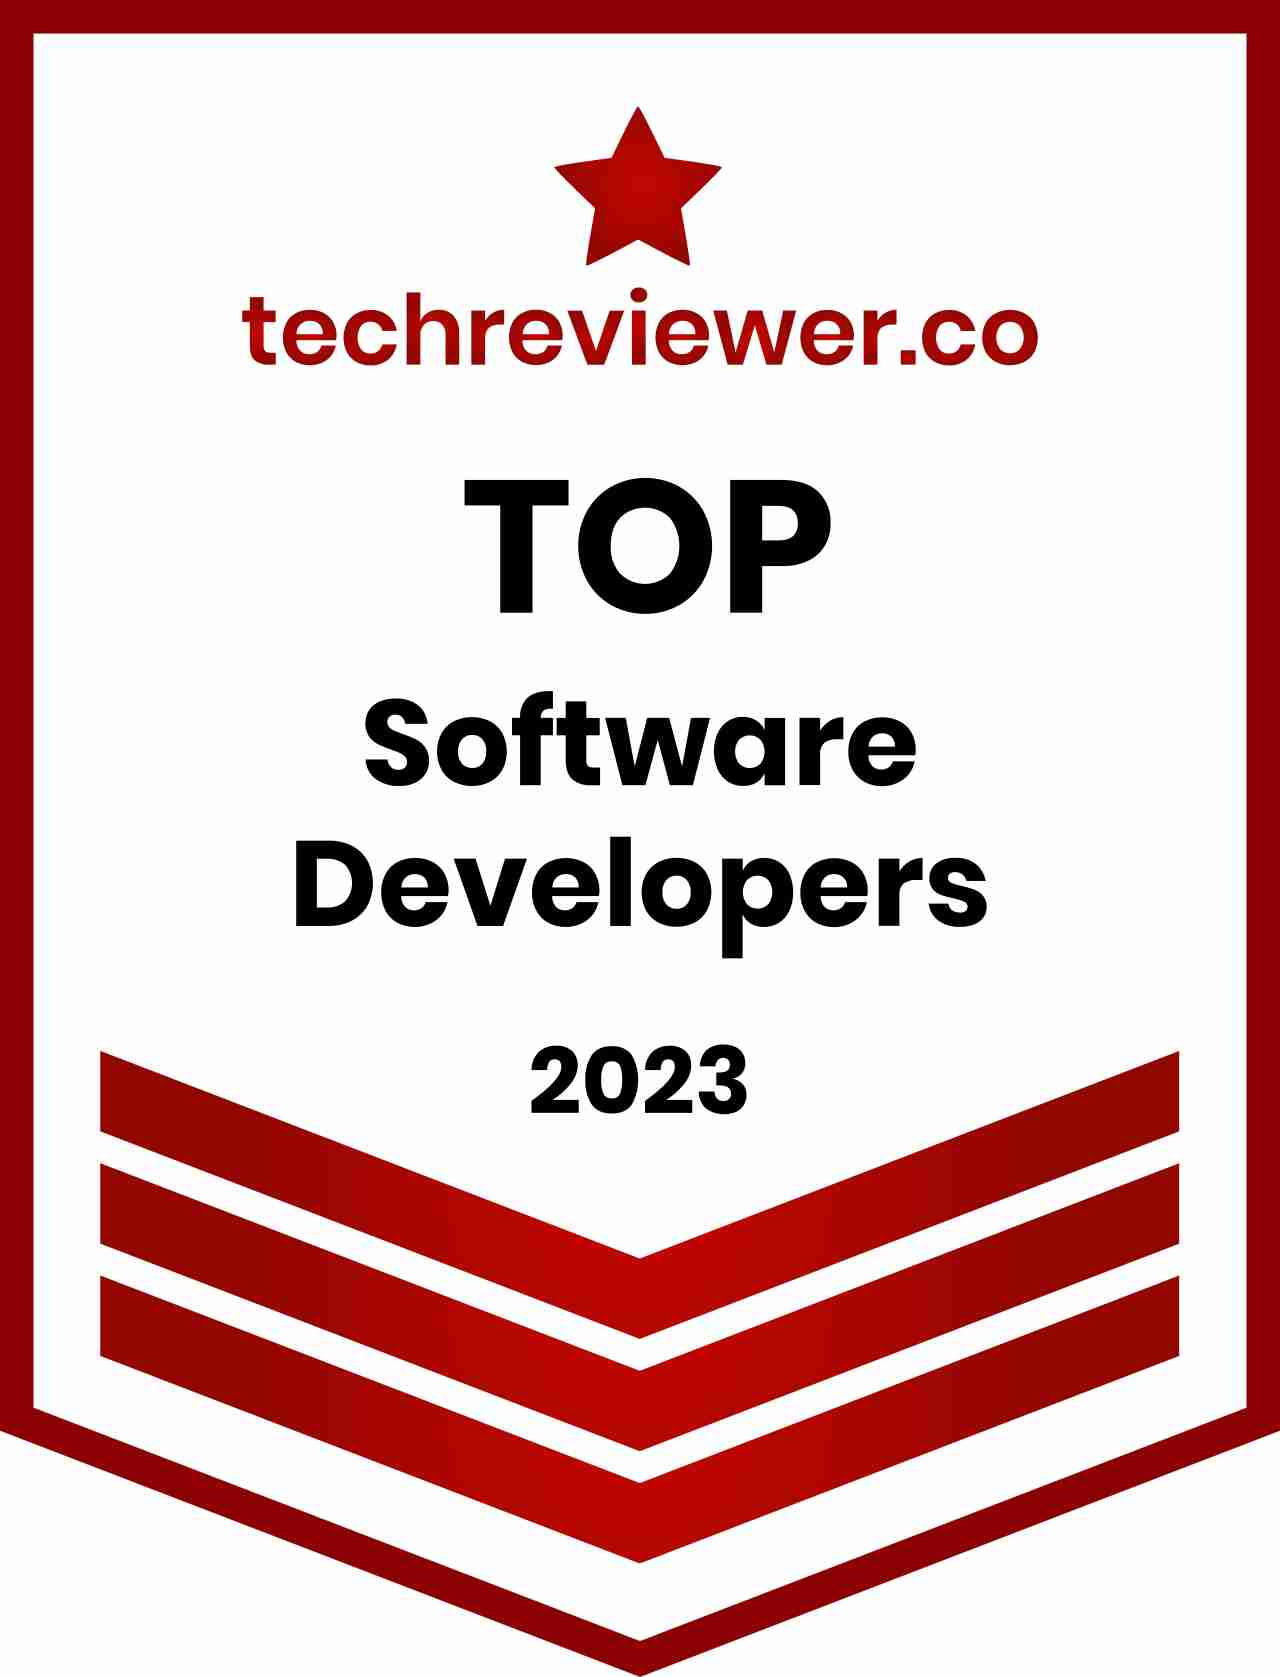 Top software development company. A pic of a badge.